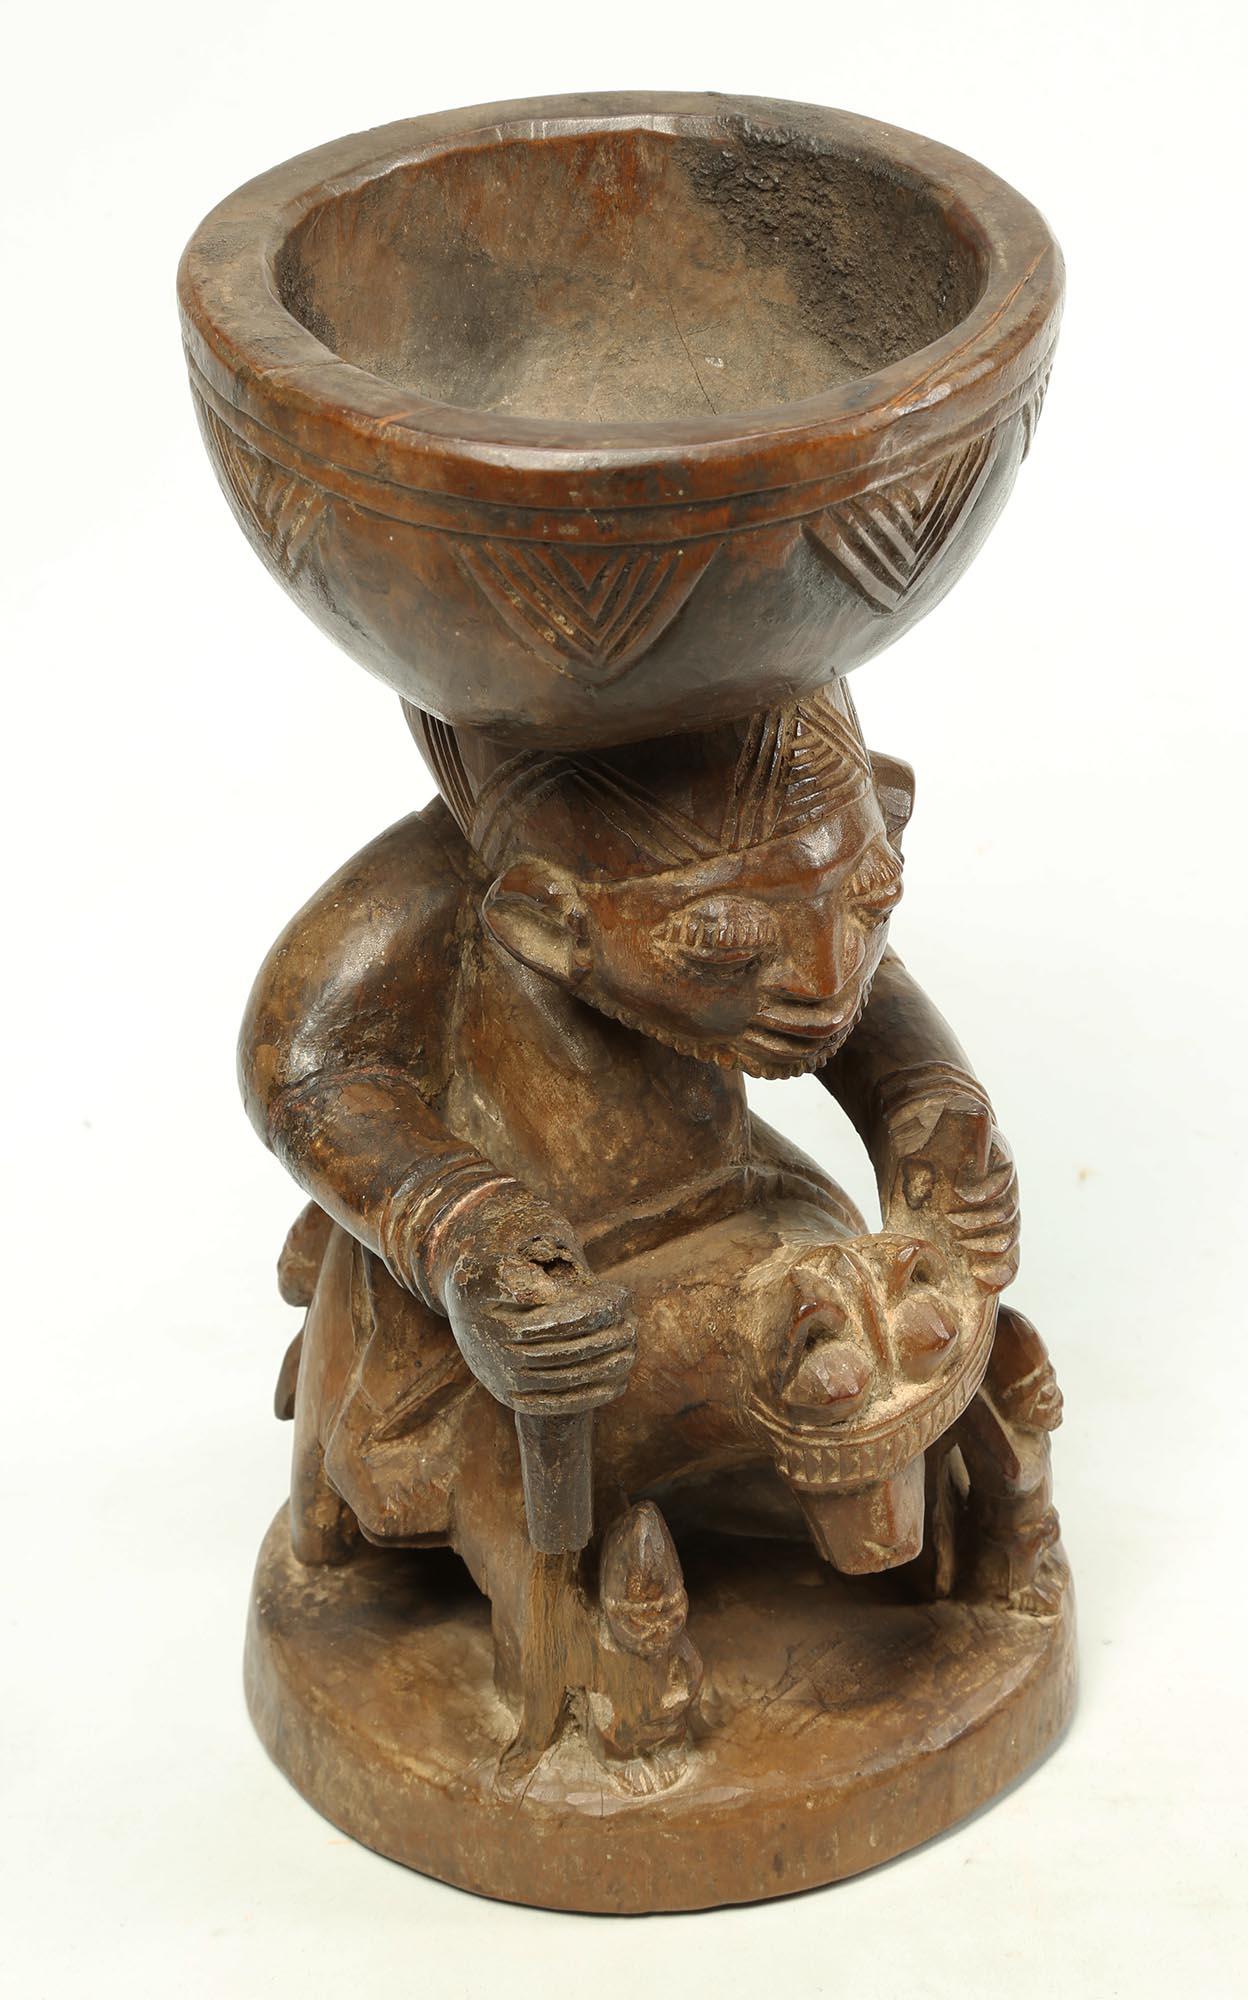 Yoruba Offering Bowl with Horse and Rider Early 20th Century Nigerian Tribal Art In Good Condition For Sale In Santa Fe, NM